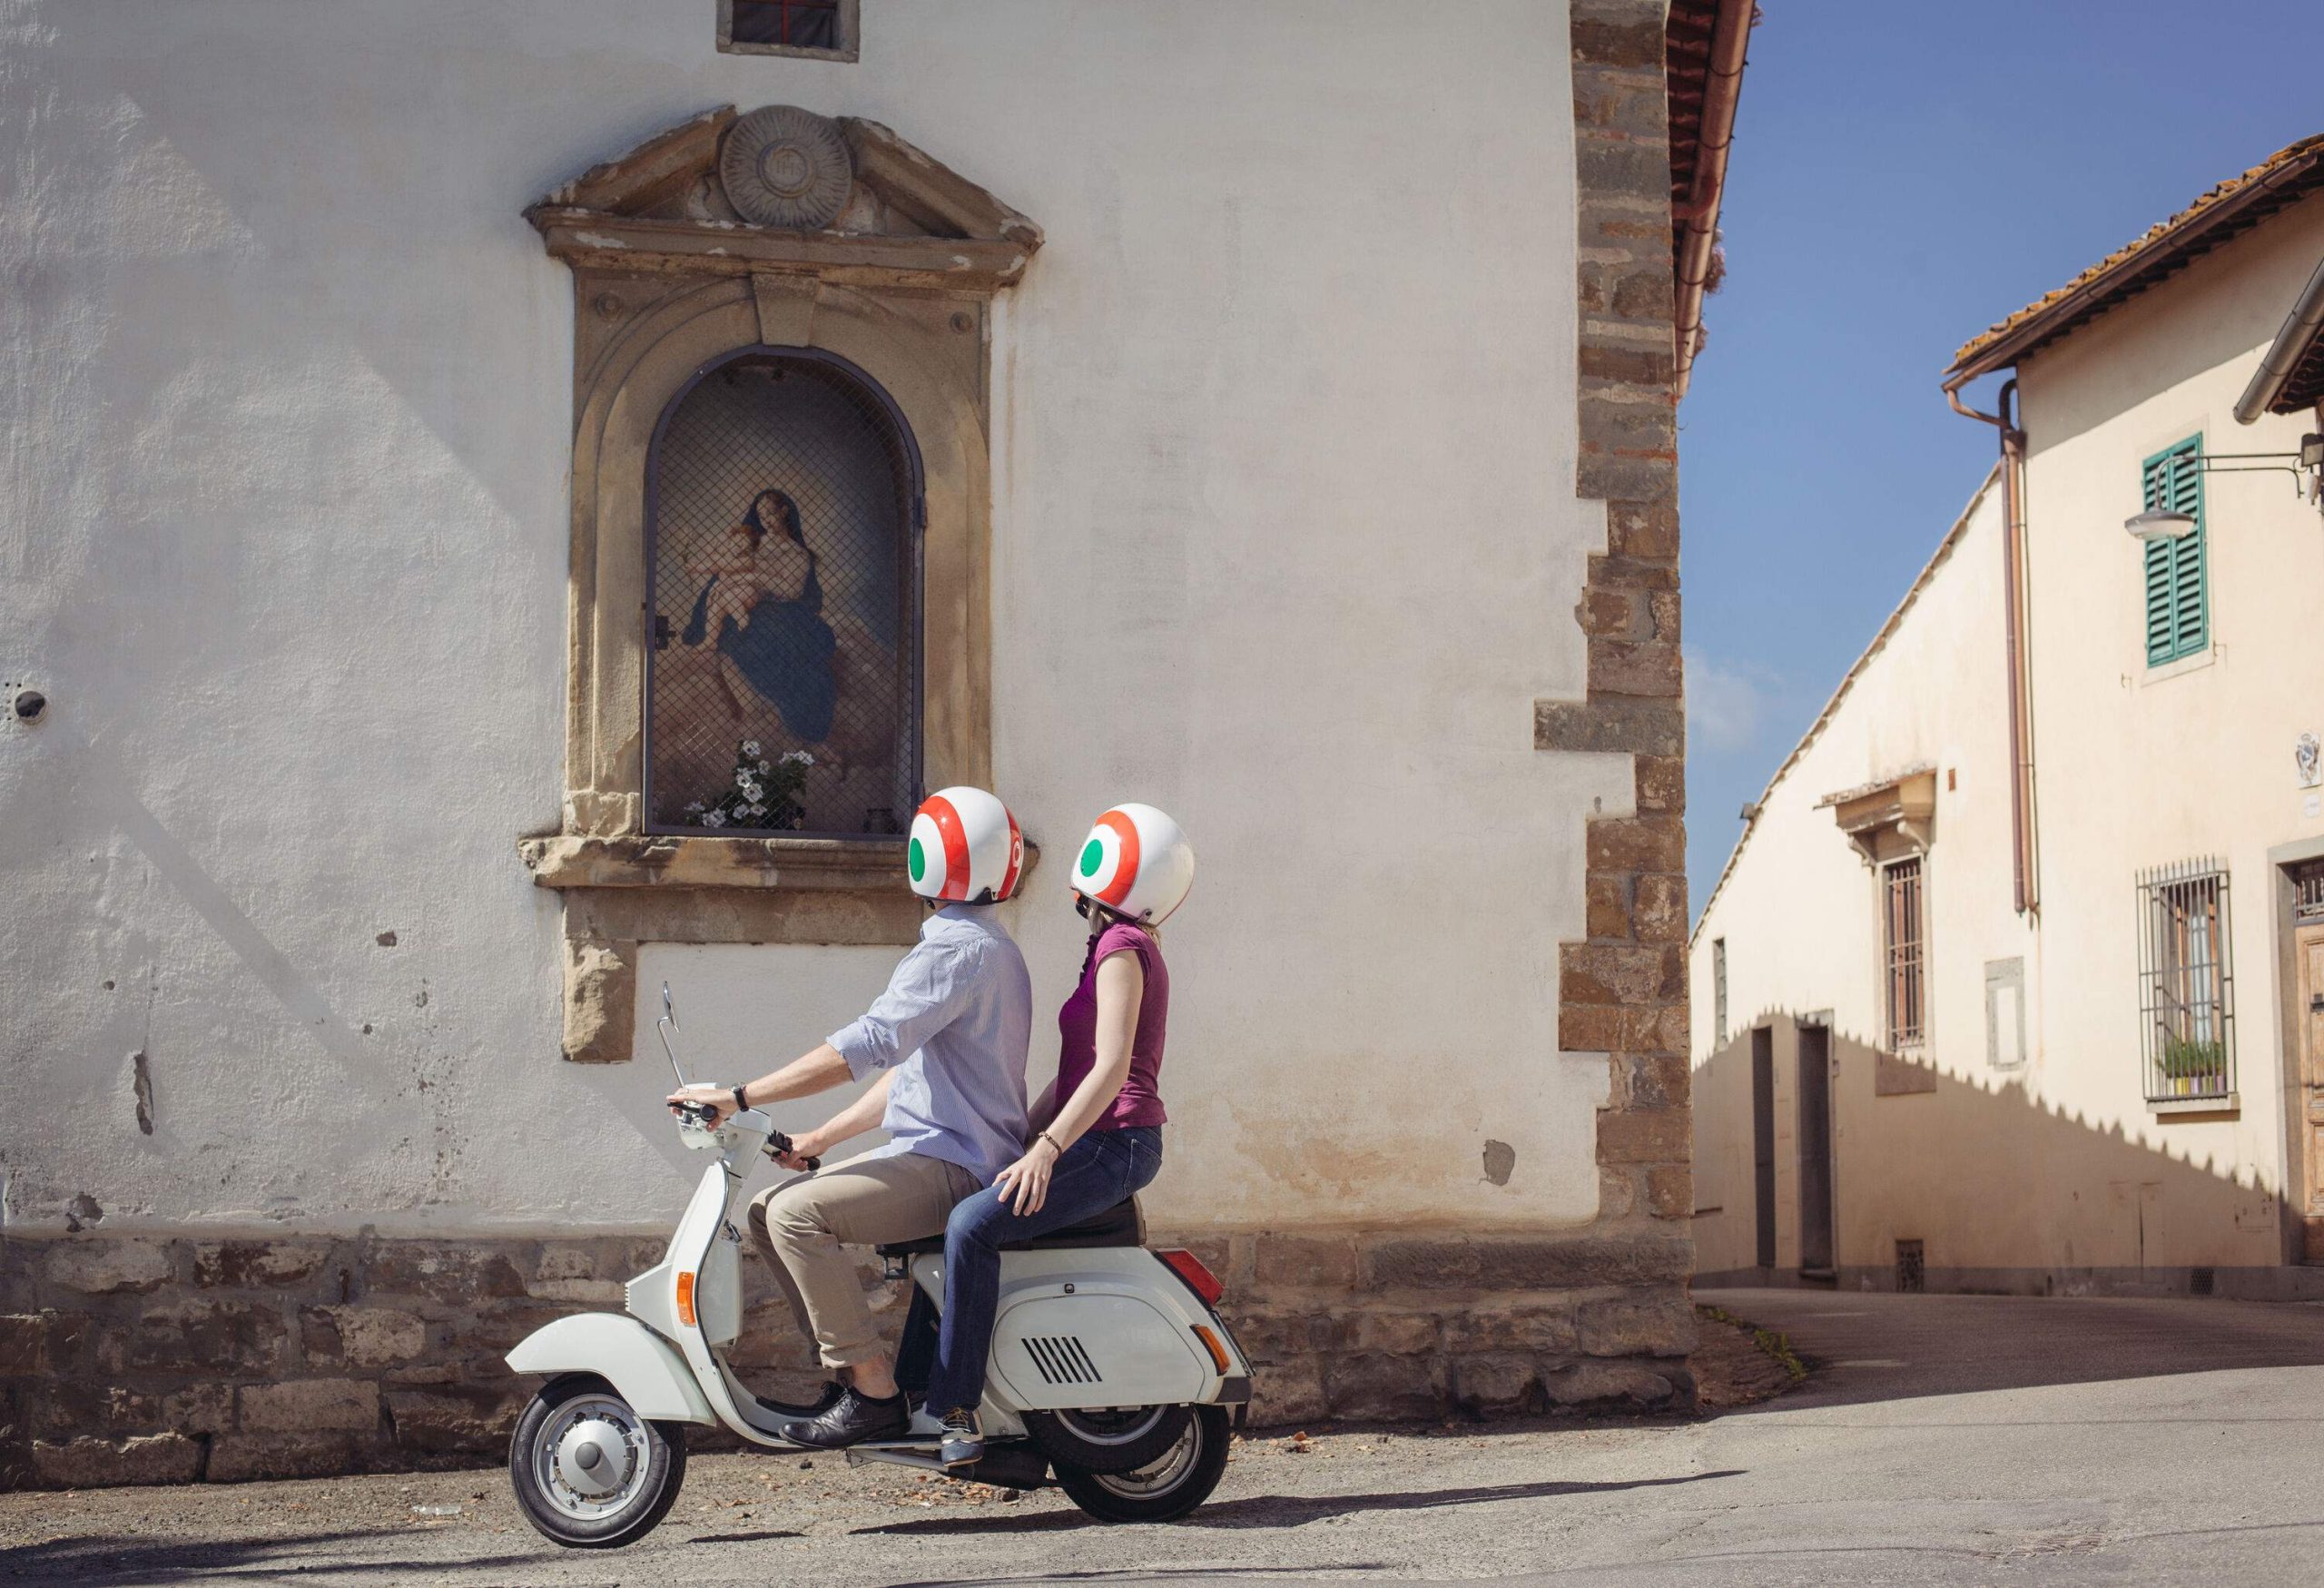 Two individuals on a classic white scooter are looking at a painting in the window of a building.